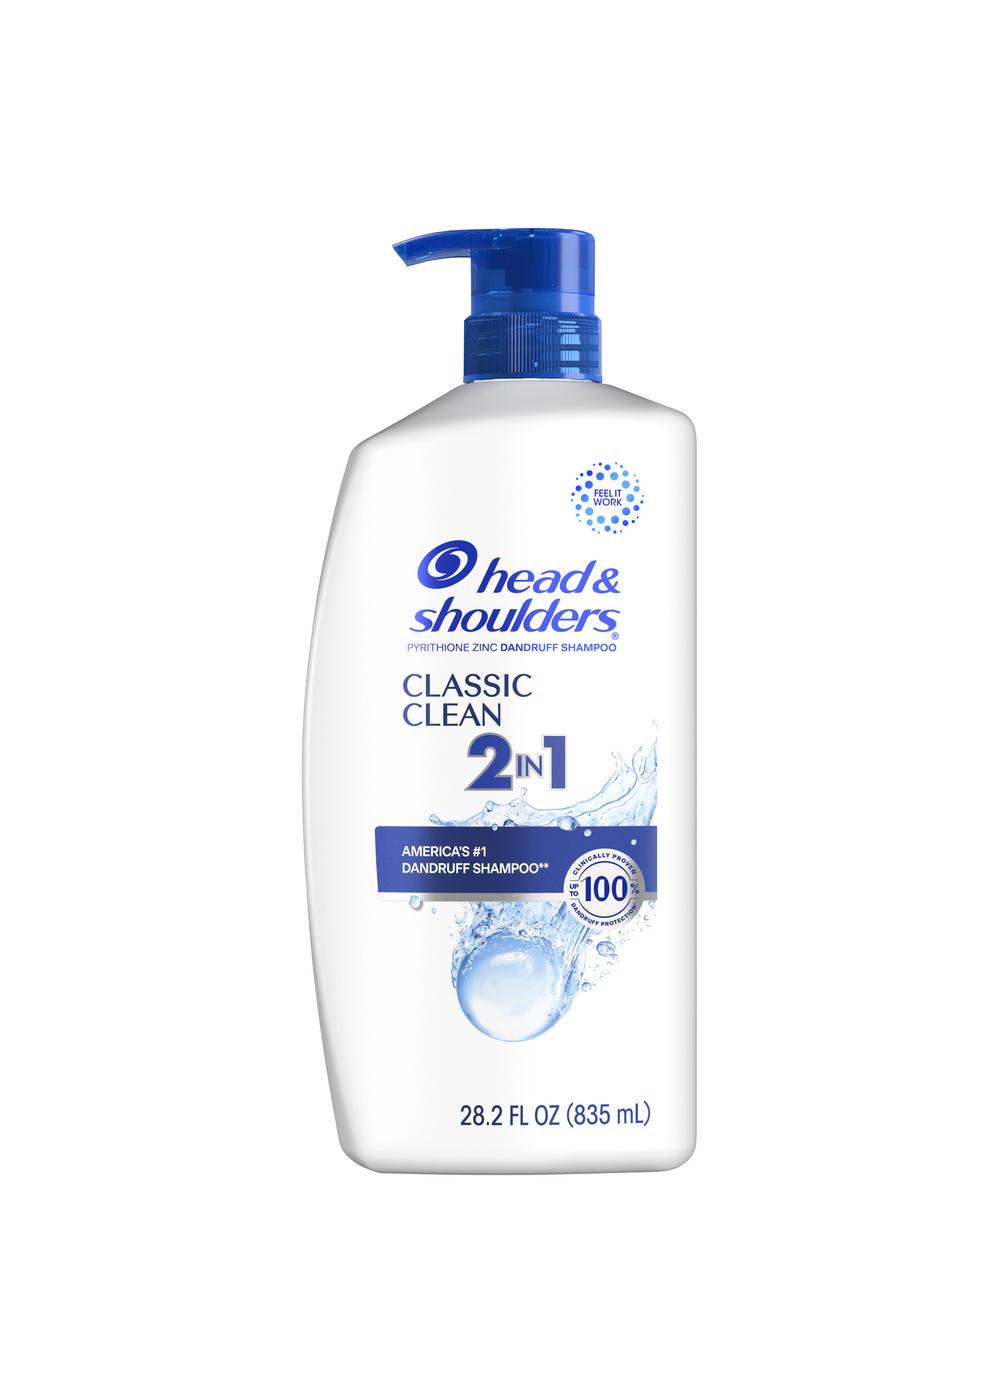 Head & Shoulders 2 in 1 Dandruff Shampoo + Conditioner - Classic Clean; image 1 of 11